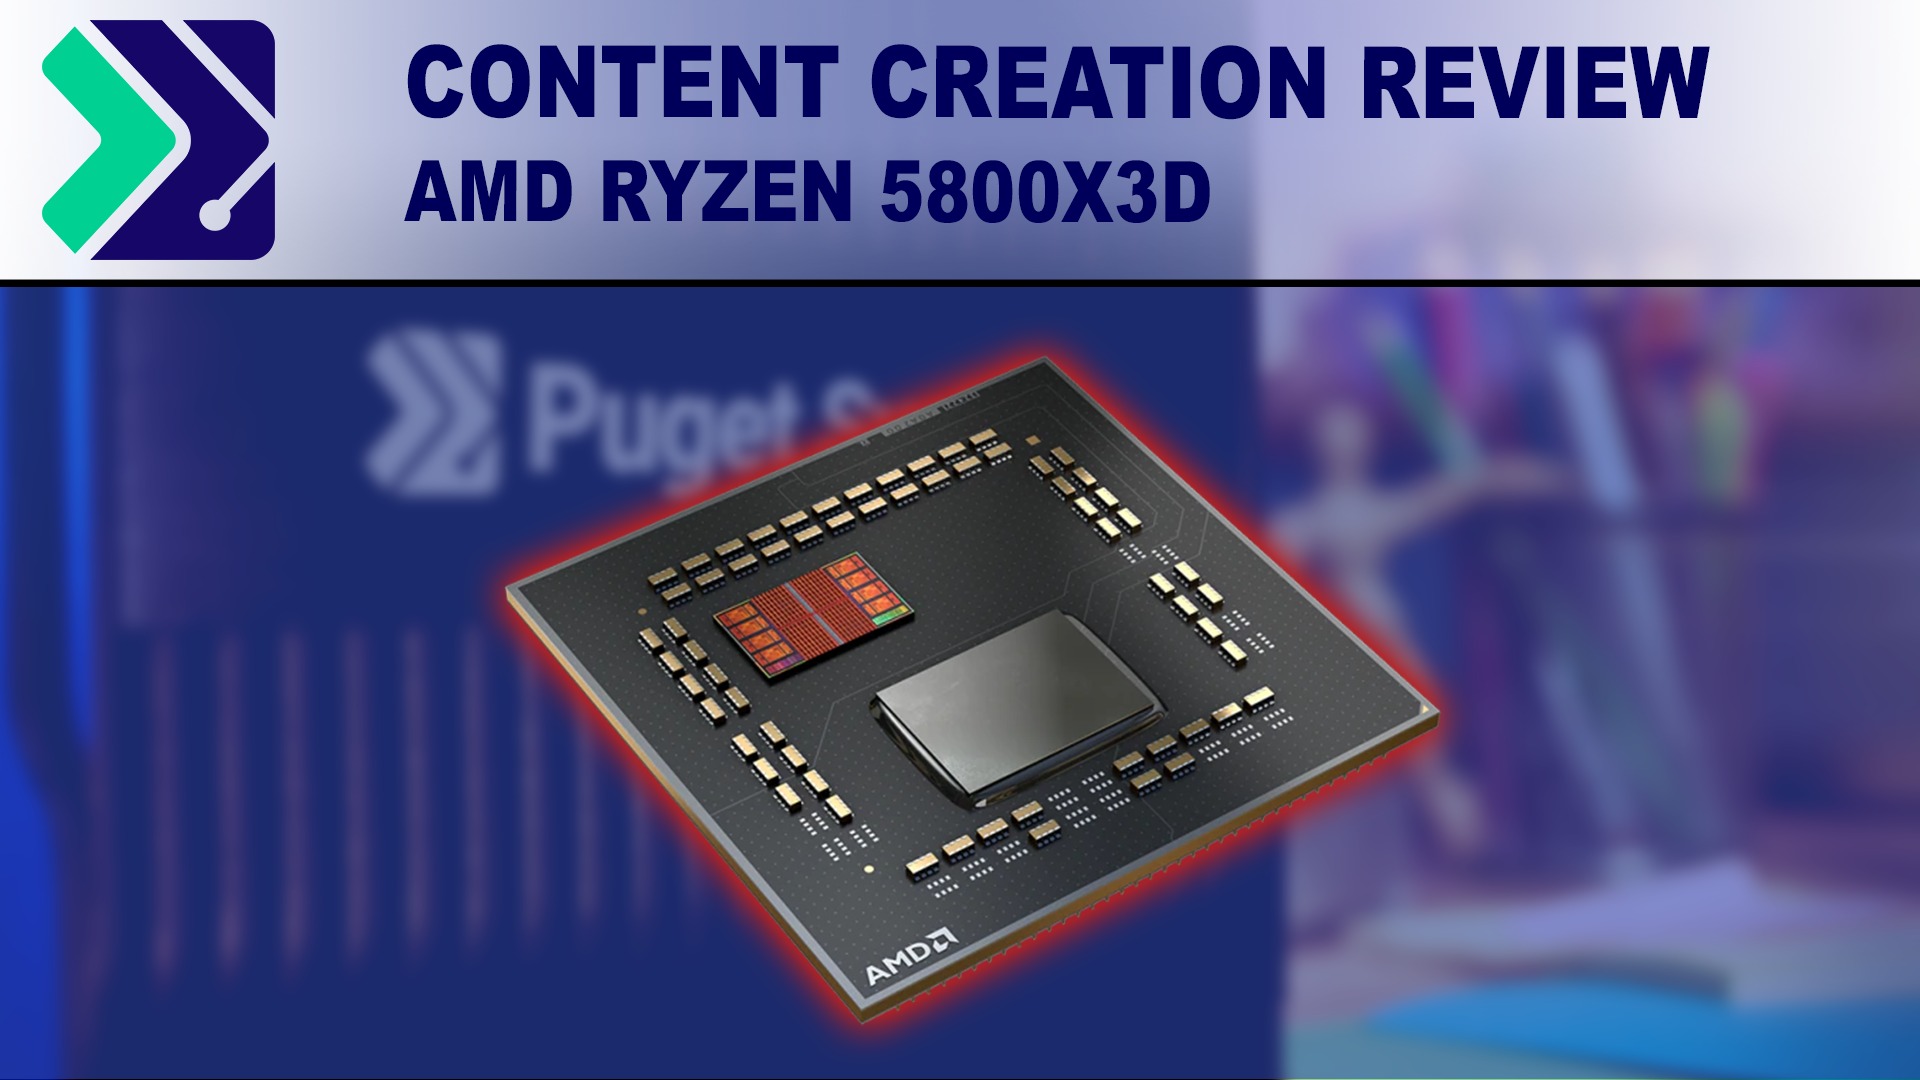 AMD Ryzen 5800X3D | Content Puget vs Creation Systems 5800X for